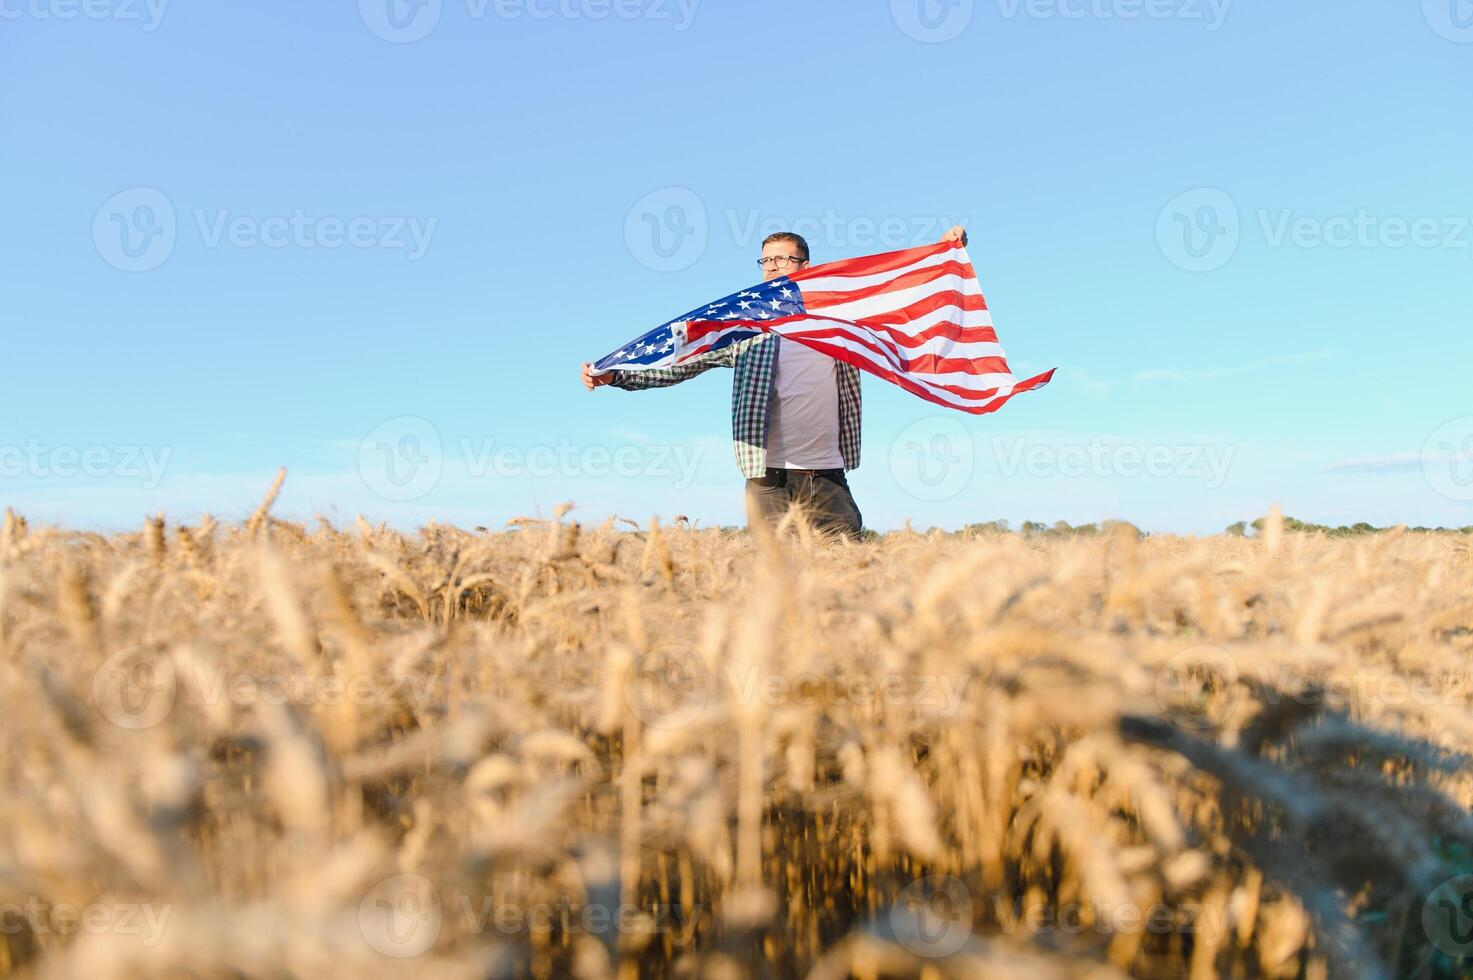 Young patriotic farmer stands among new harvest. Boy walking with the american flag on the wheat field celebrating national independence day. 4th of July concept. photo